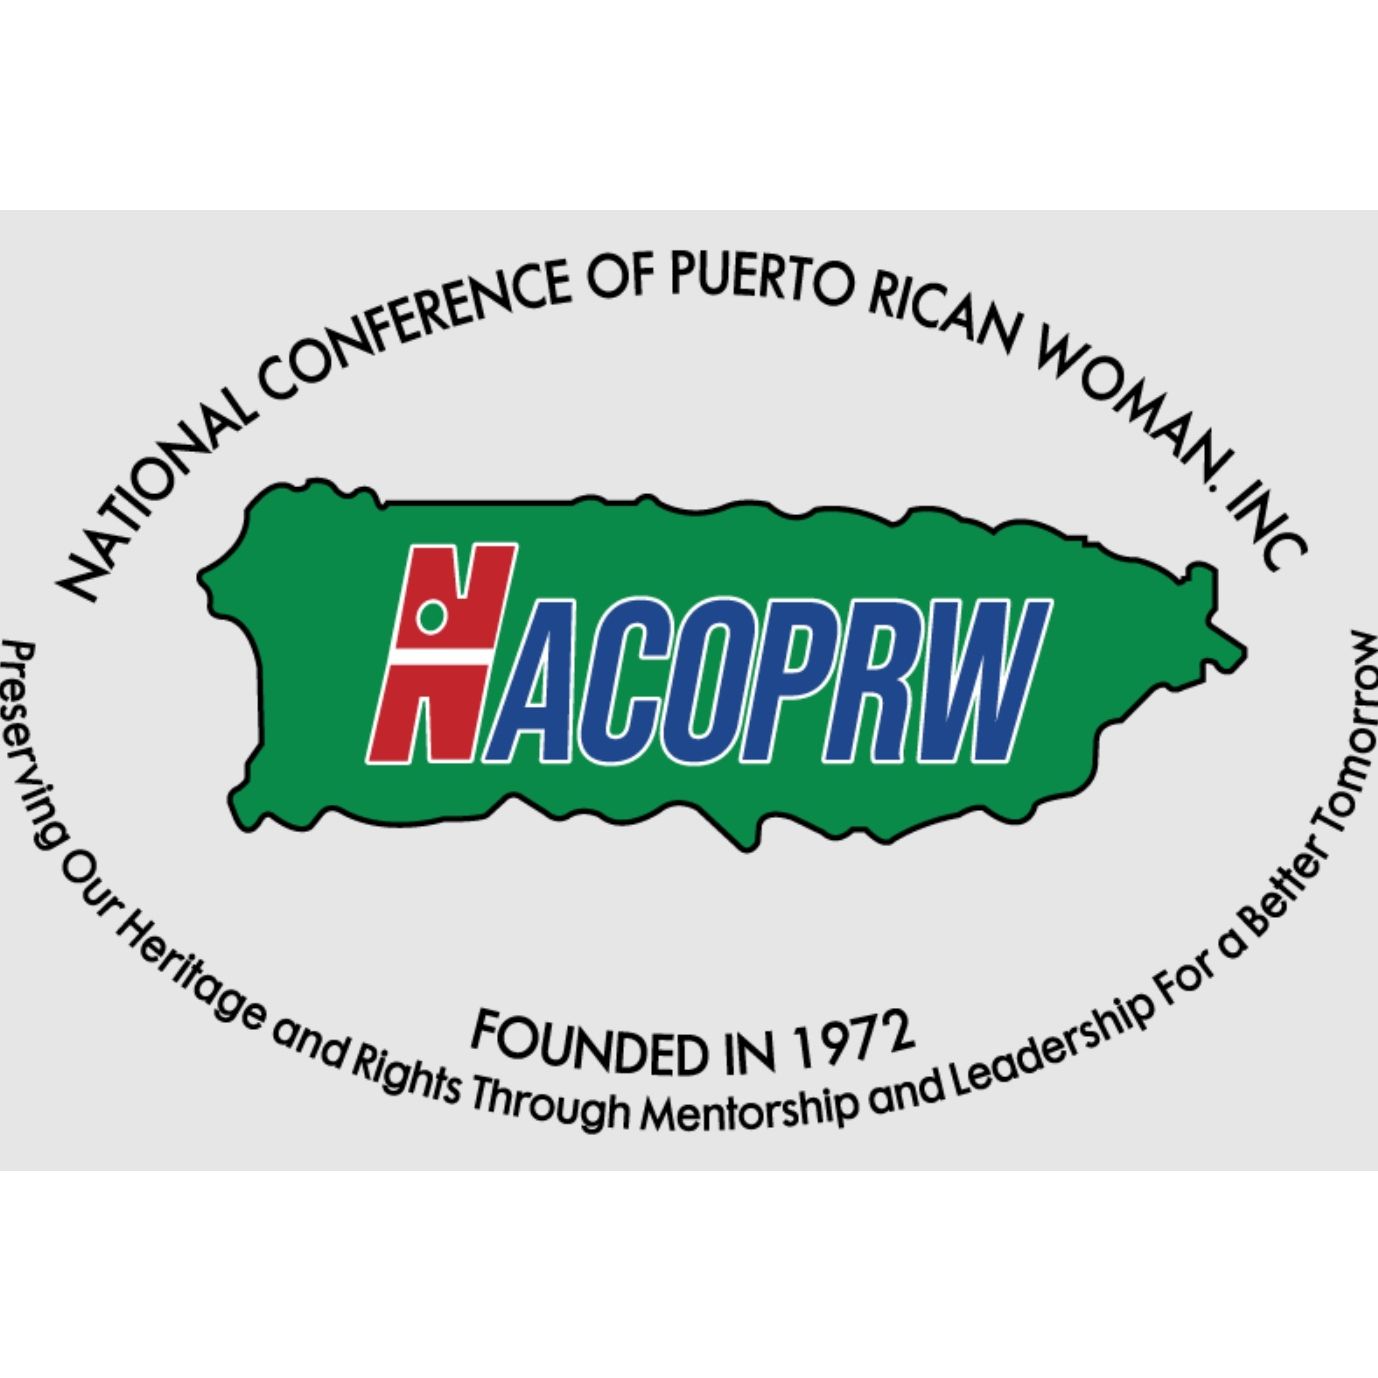 Women Organizations in Florida - National Conference of Puerto Rican Women Miami Chapter